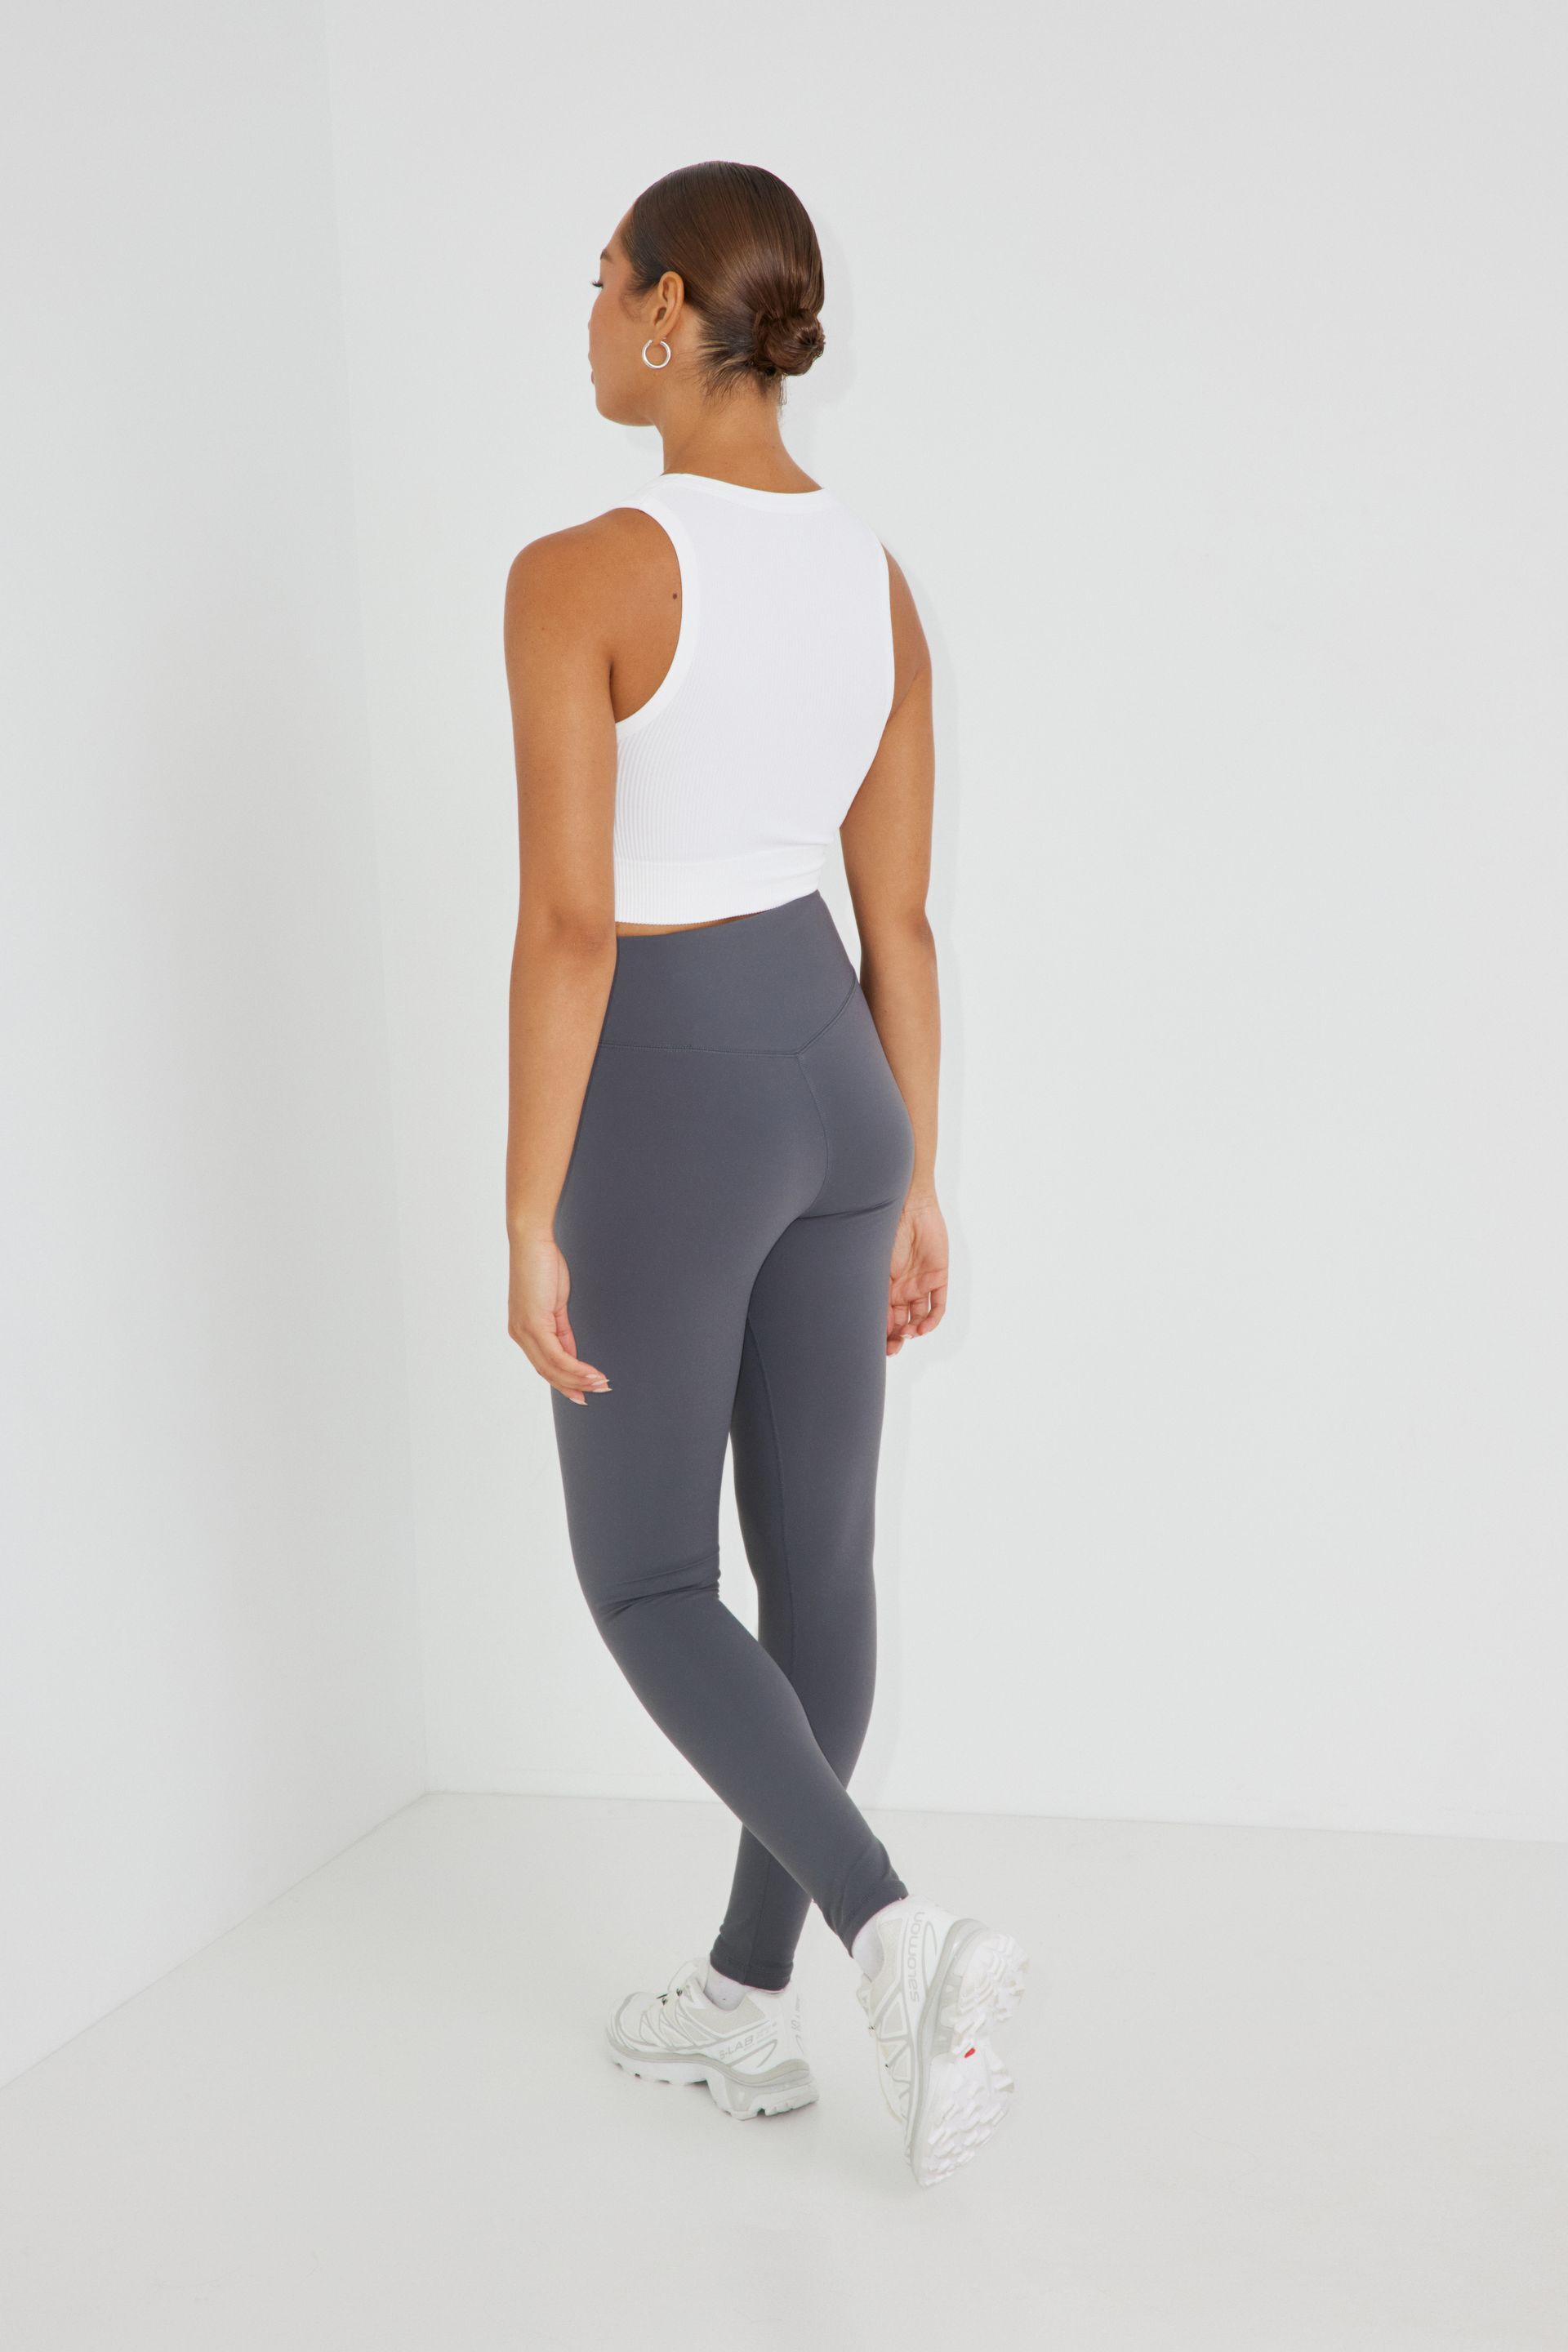 Ready To Relax High Waist Legging in Grey • Impressions Online Boutique